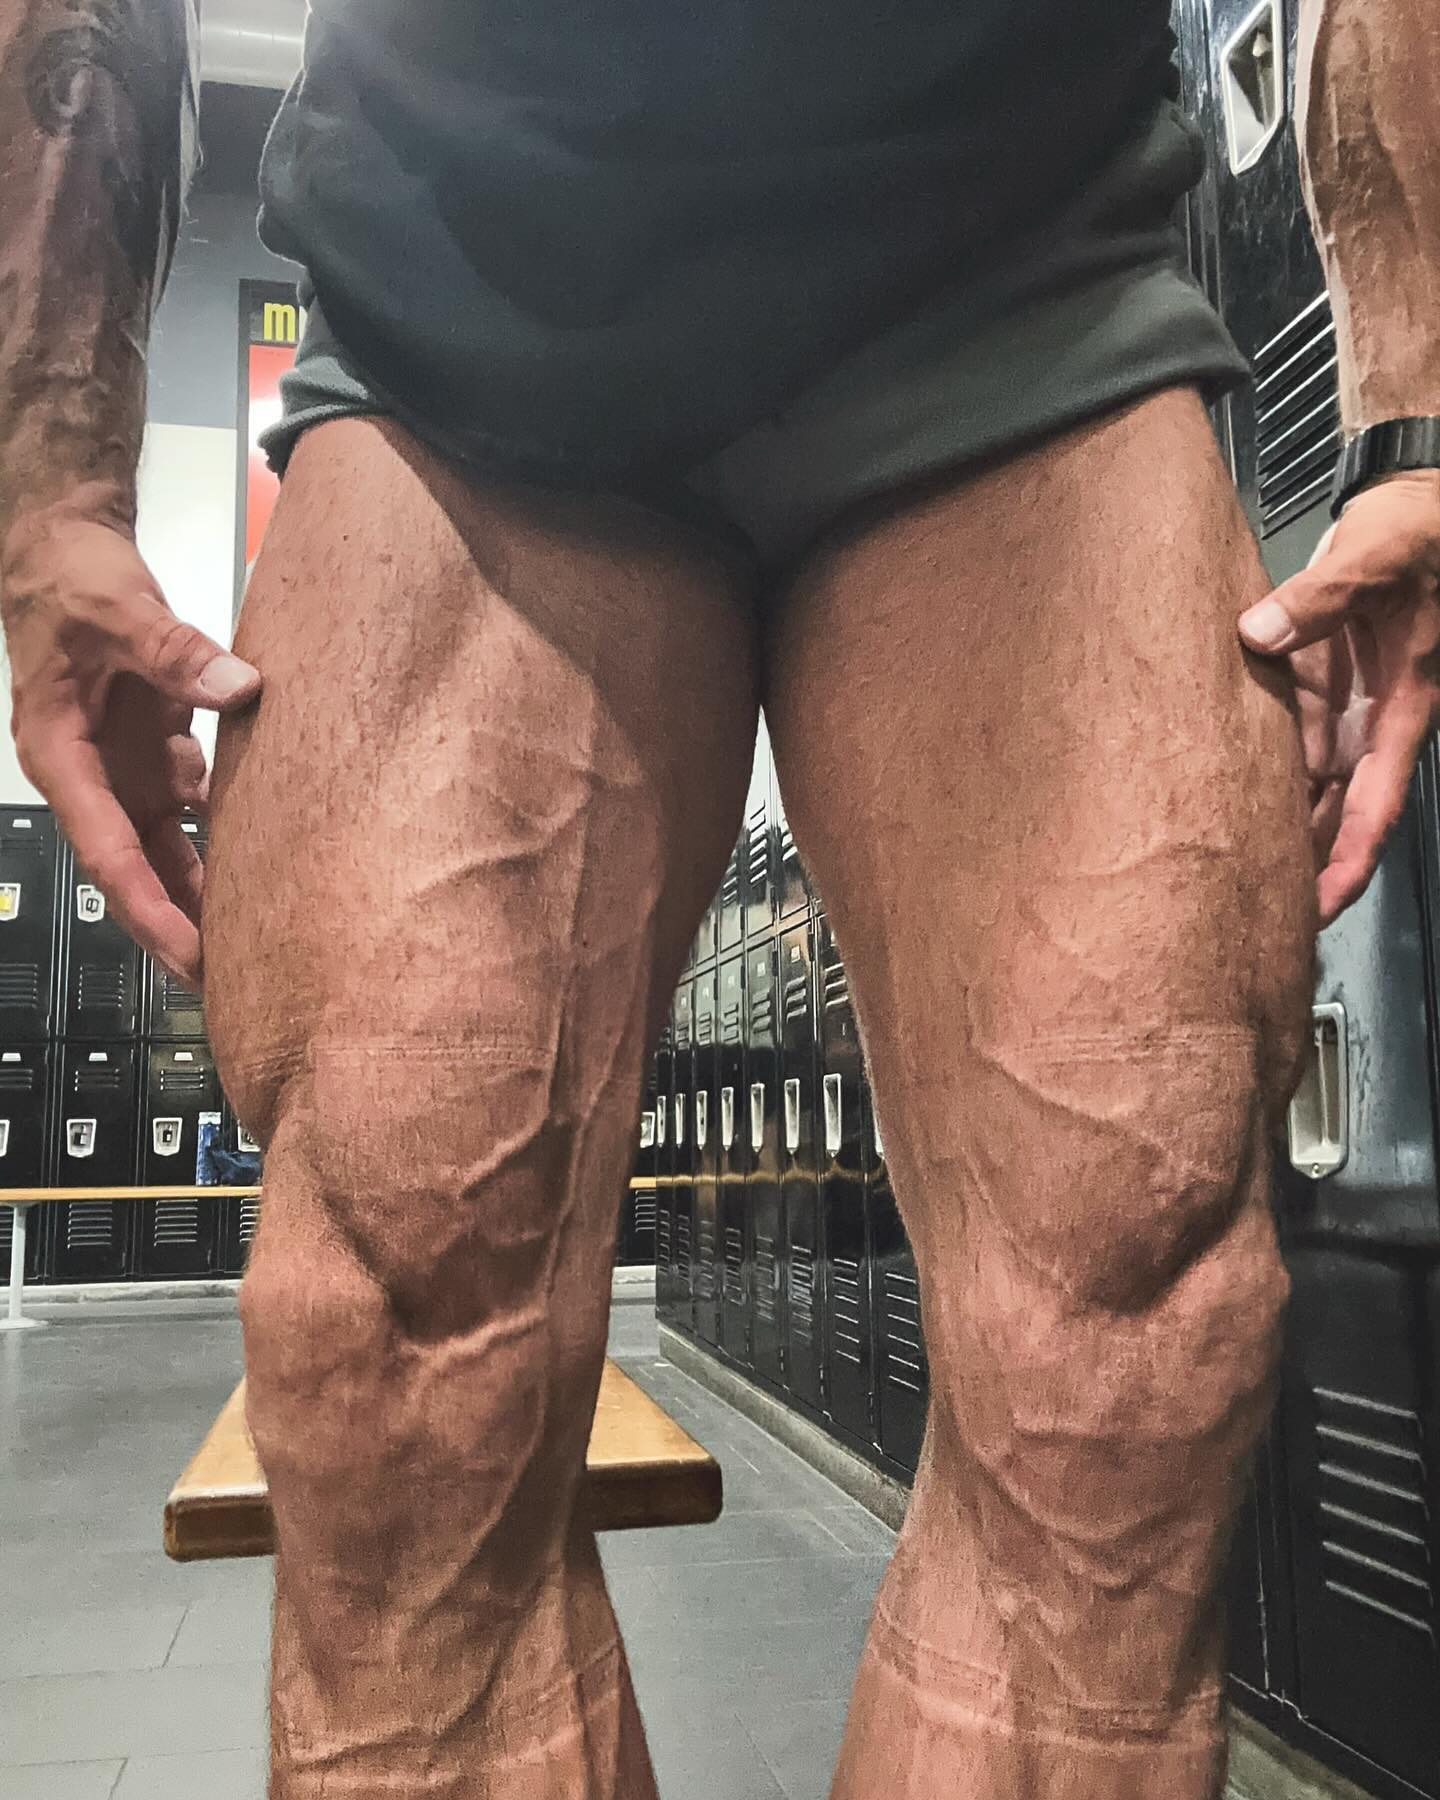 Quads Day in the Bag! #quads #quadsworkout #legday #squats #lungesandsquats #lunges #quadseparation #fitover50 #gayfit #gaymuscle #gaymuscles #vascular #vascularaf